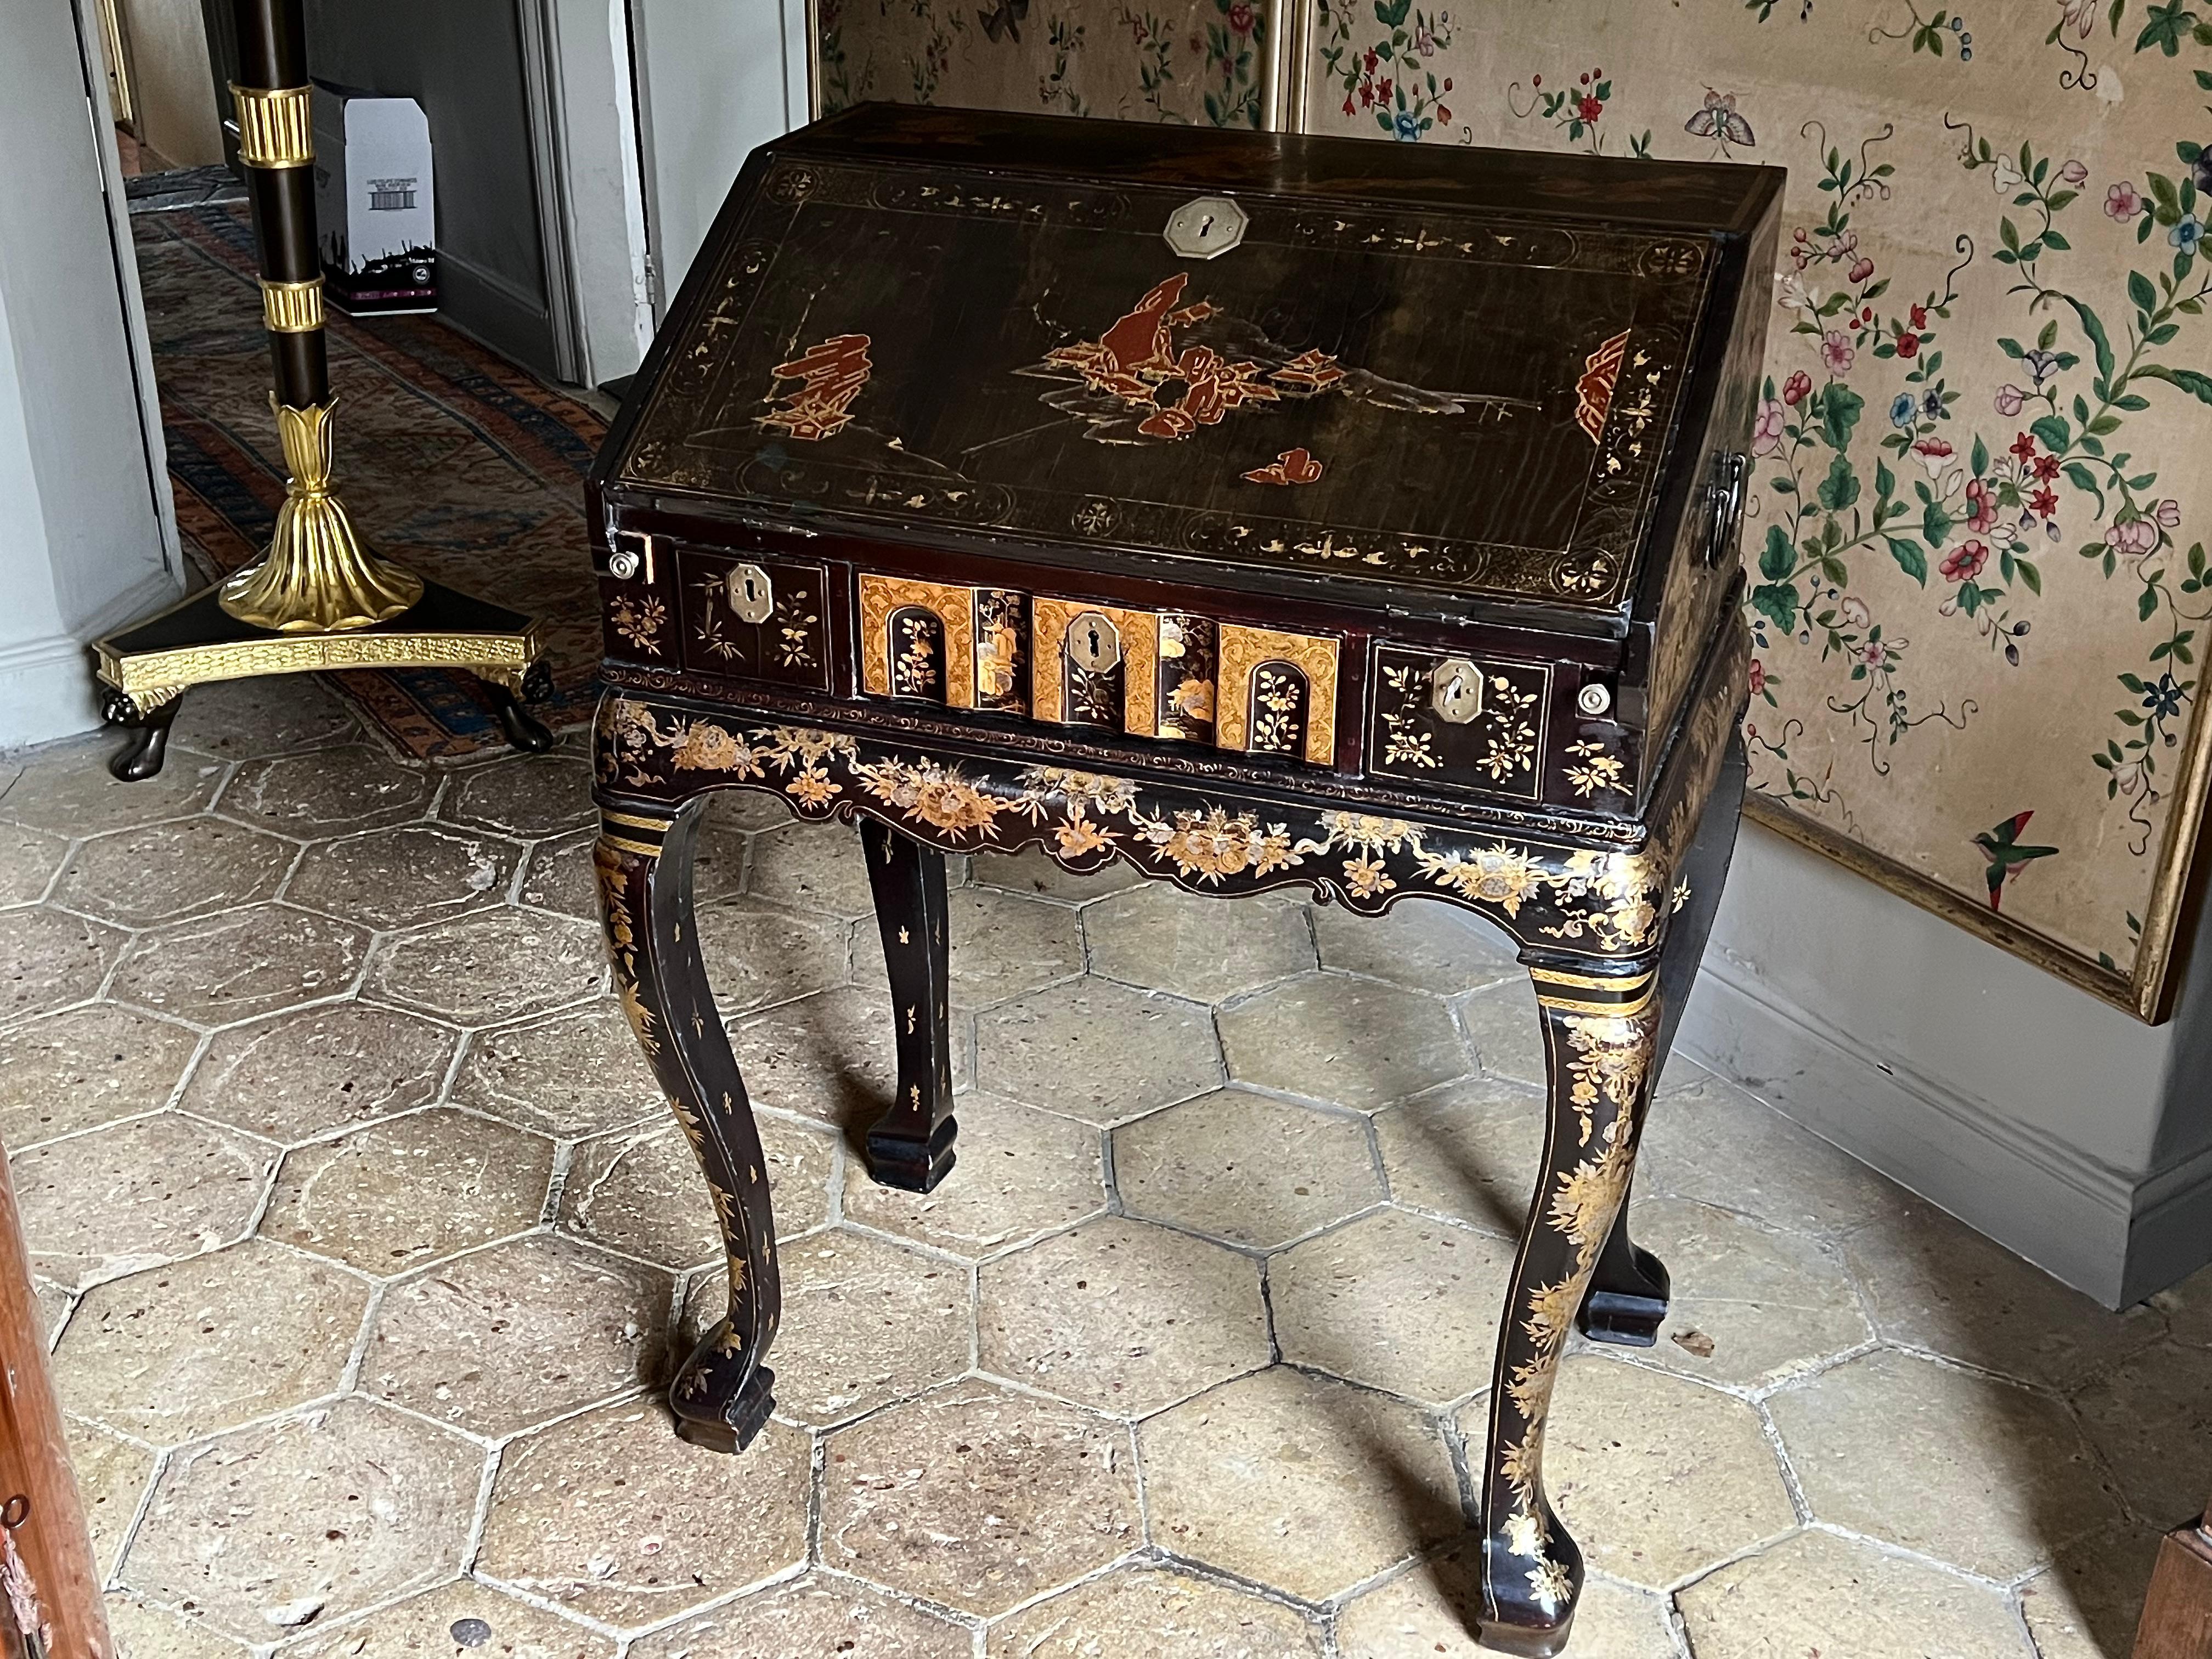 A small Chinese export lacquer desk, circa 1750.

Nb. This compact bureau on stand, or dressing table, was probably made in Canton specifically for the export trade to meet the demands of the European market.
It follows designs prevalent in England